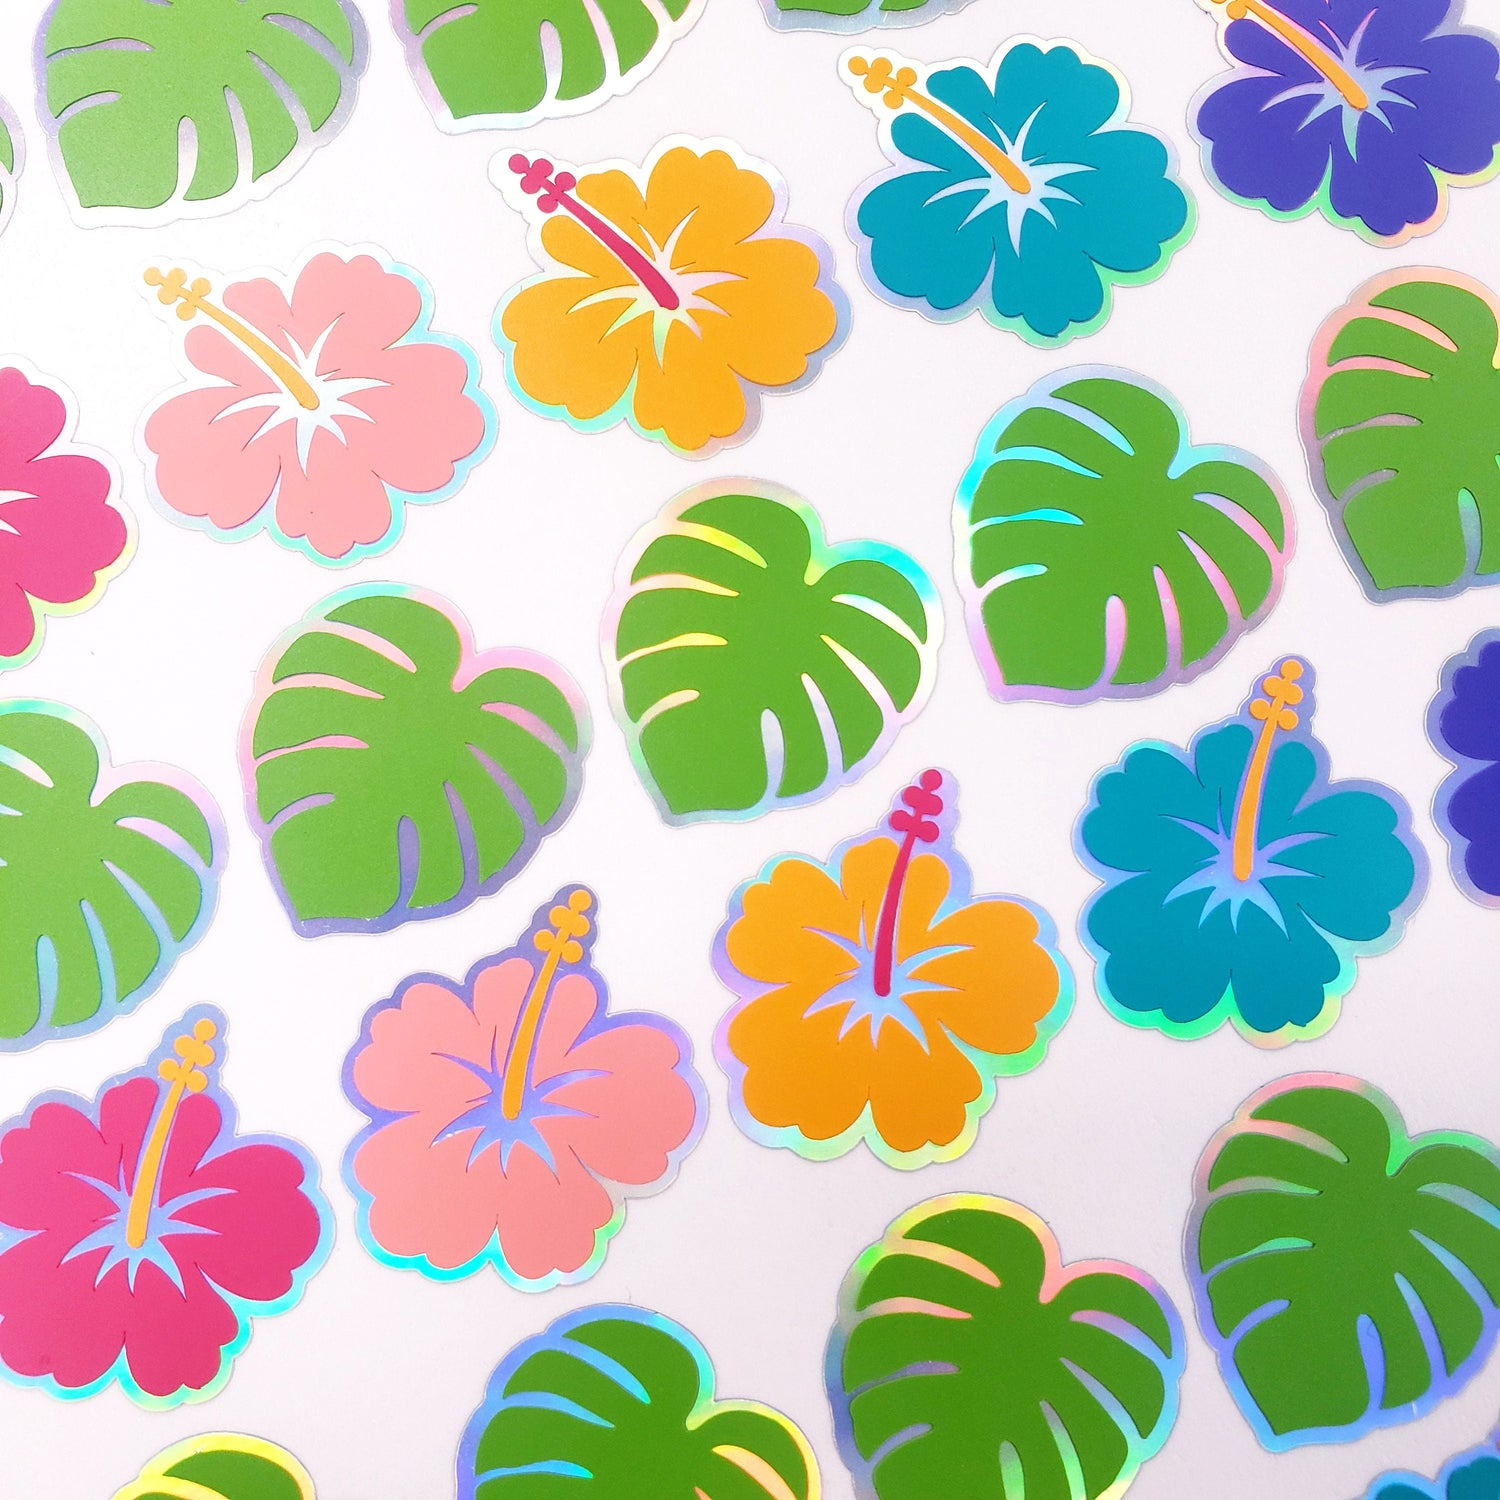 Tropical Flower Stickers, set of 20 hibiscus blooms and 15 monstera leaf stickers for journals, stationery and envelopes, bright colors.